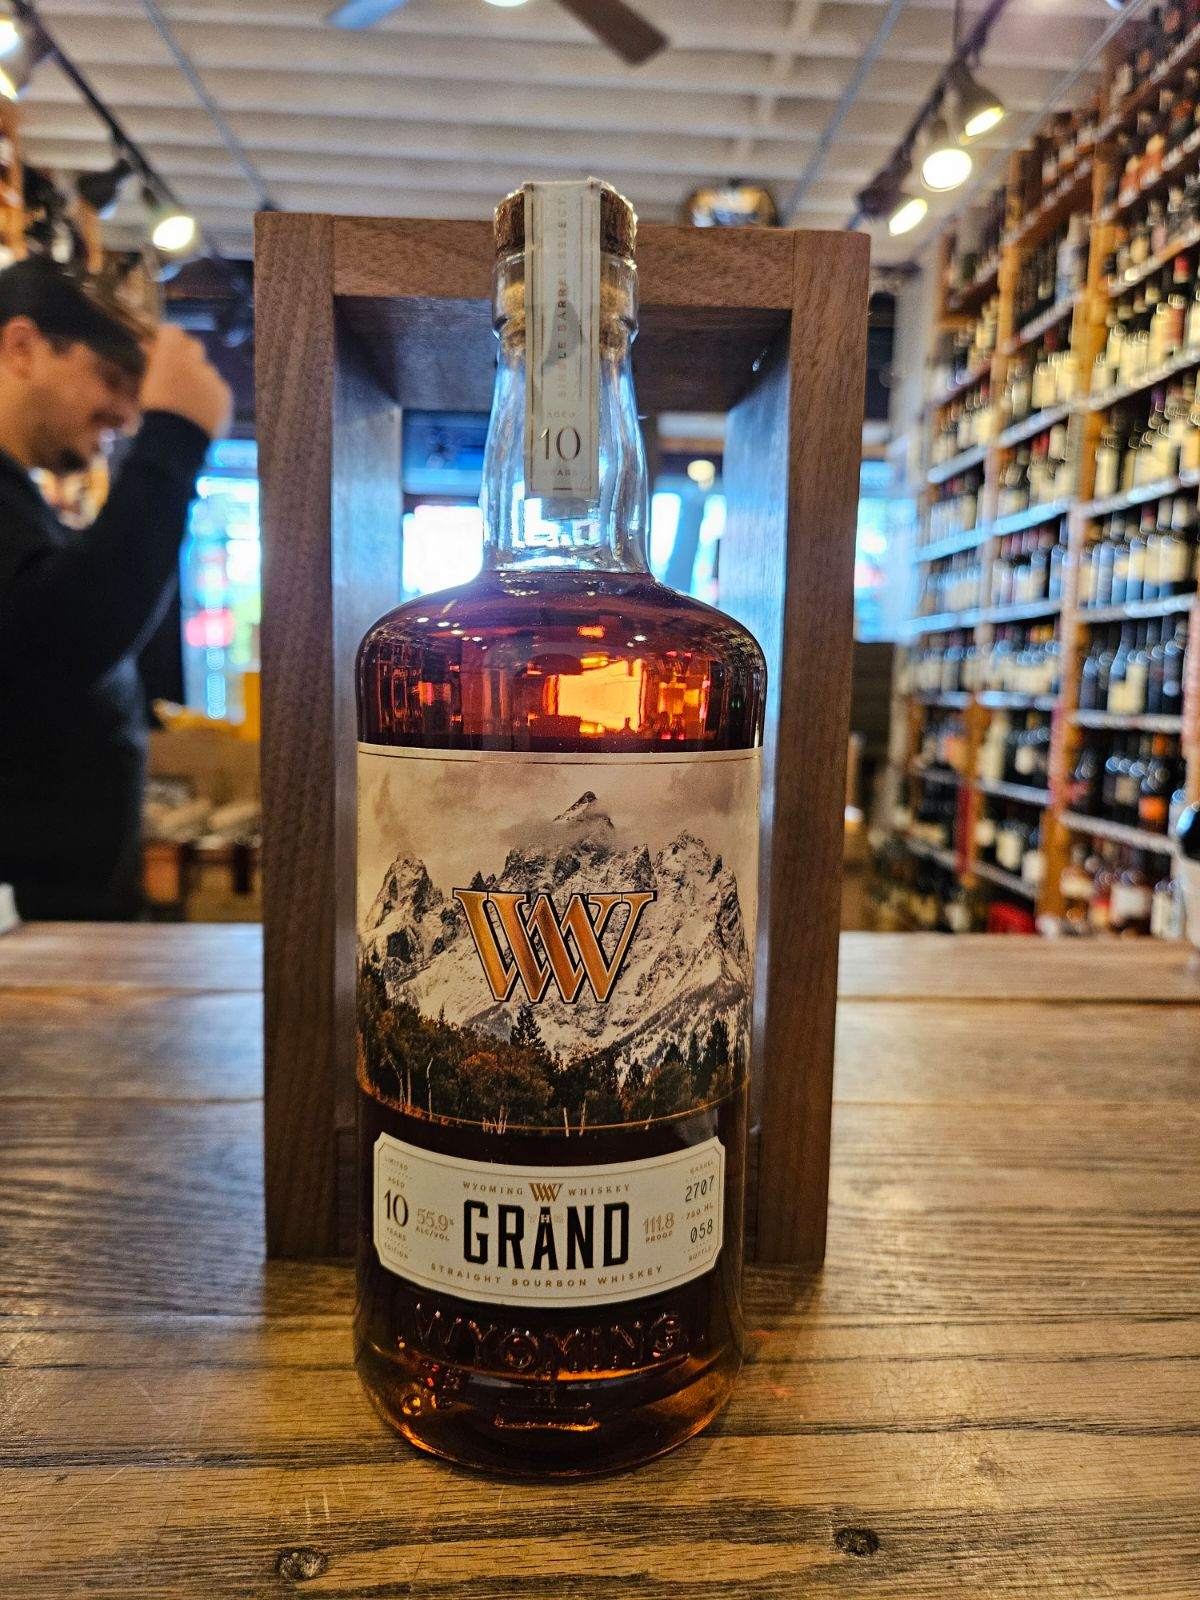 Wyoming Whiskey The Grand Barrel No. 2707 111.8º